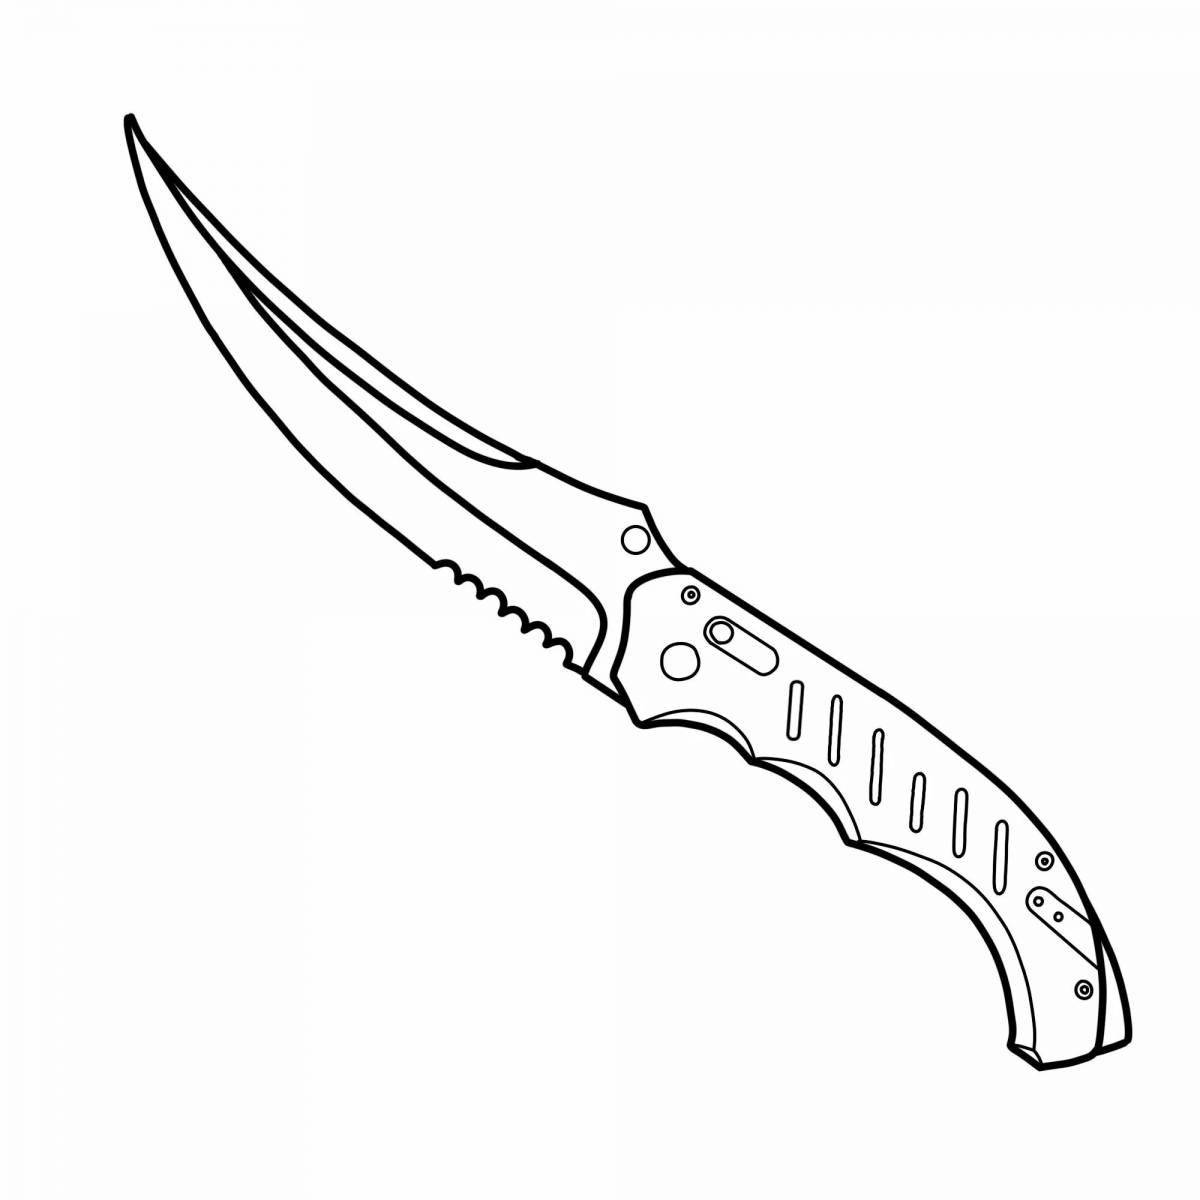 Colouring stylish knives from standoff 2